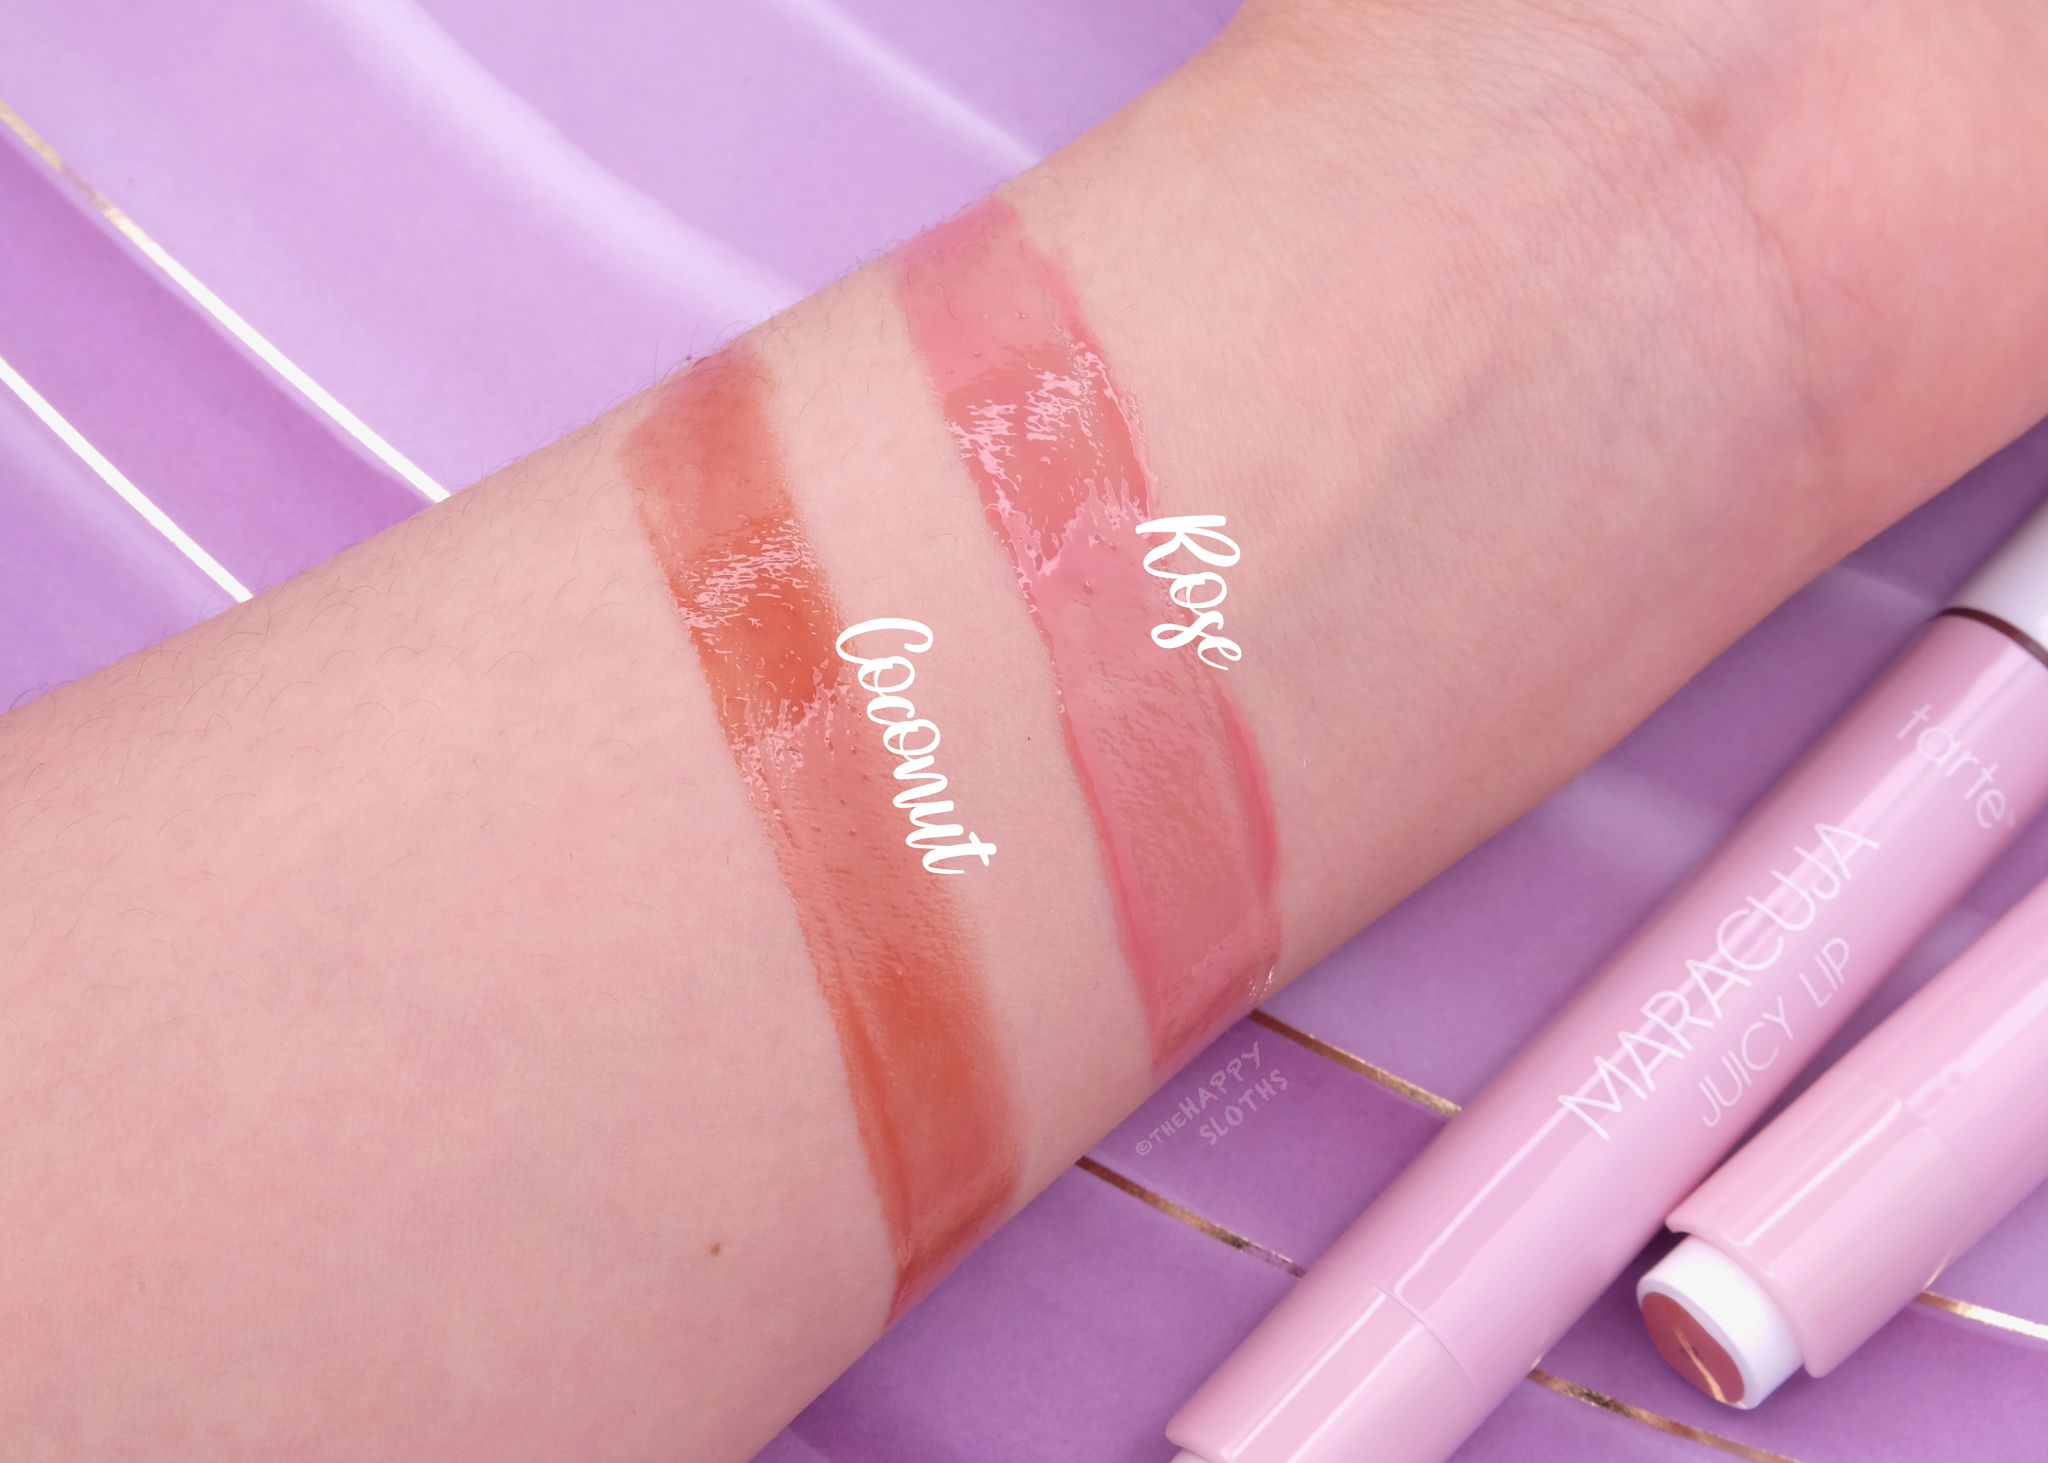 Tarte | Maracuja Juicy Lip: Review and Swatches